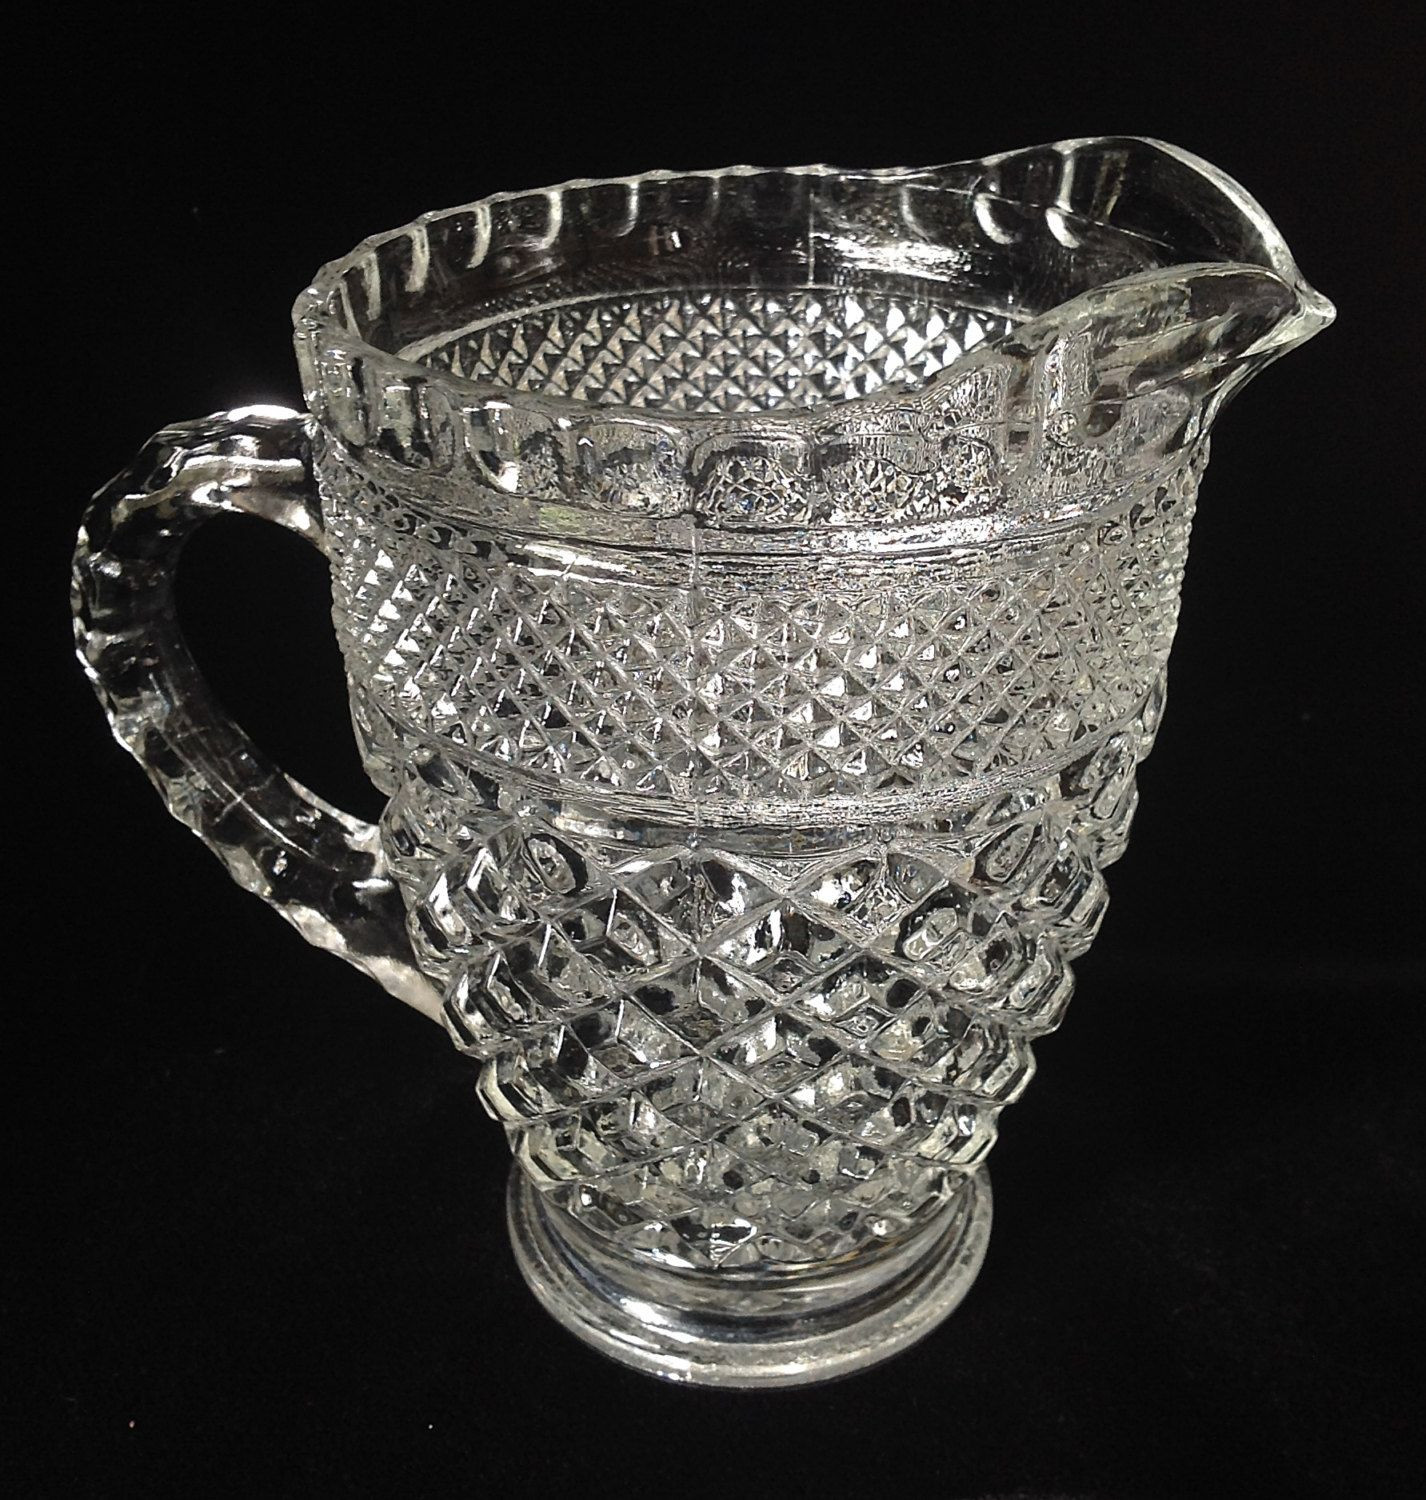 18 Recommended Anchor Hocking Glass Vases 2022 free download anchor hocking glass vases of anchor hocking wexford iced tea glass image1 for anchor hocking wexford milk juice pitcher 18 ounce vintage glassware by anniesoldstuff on etsy 11